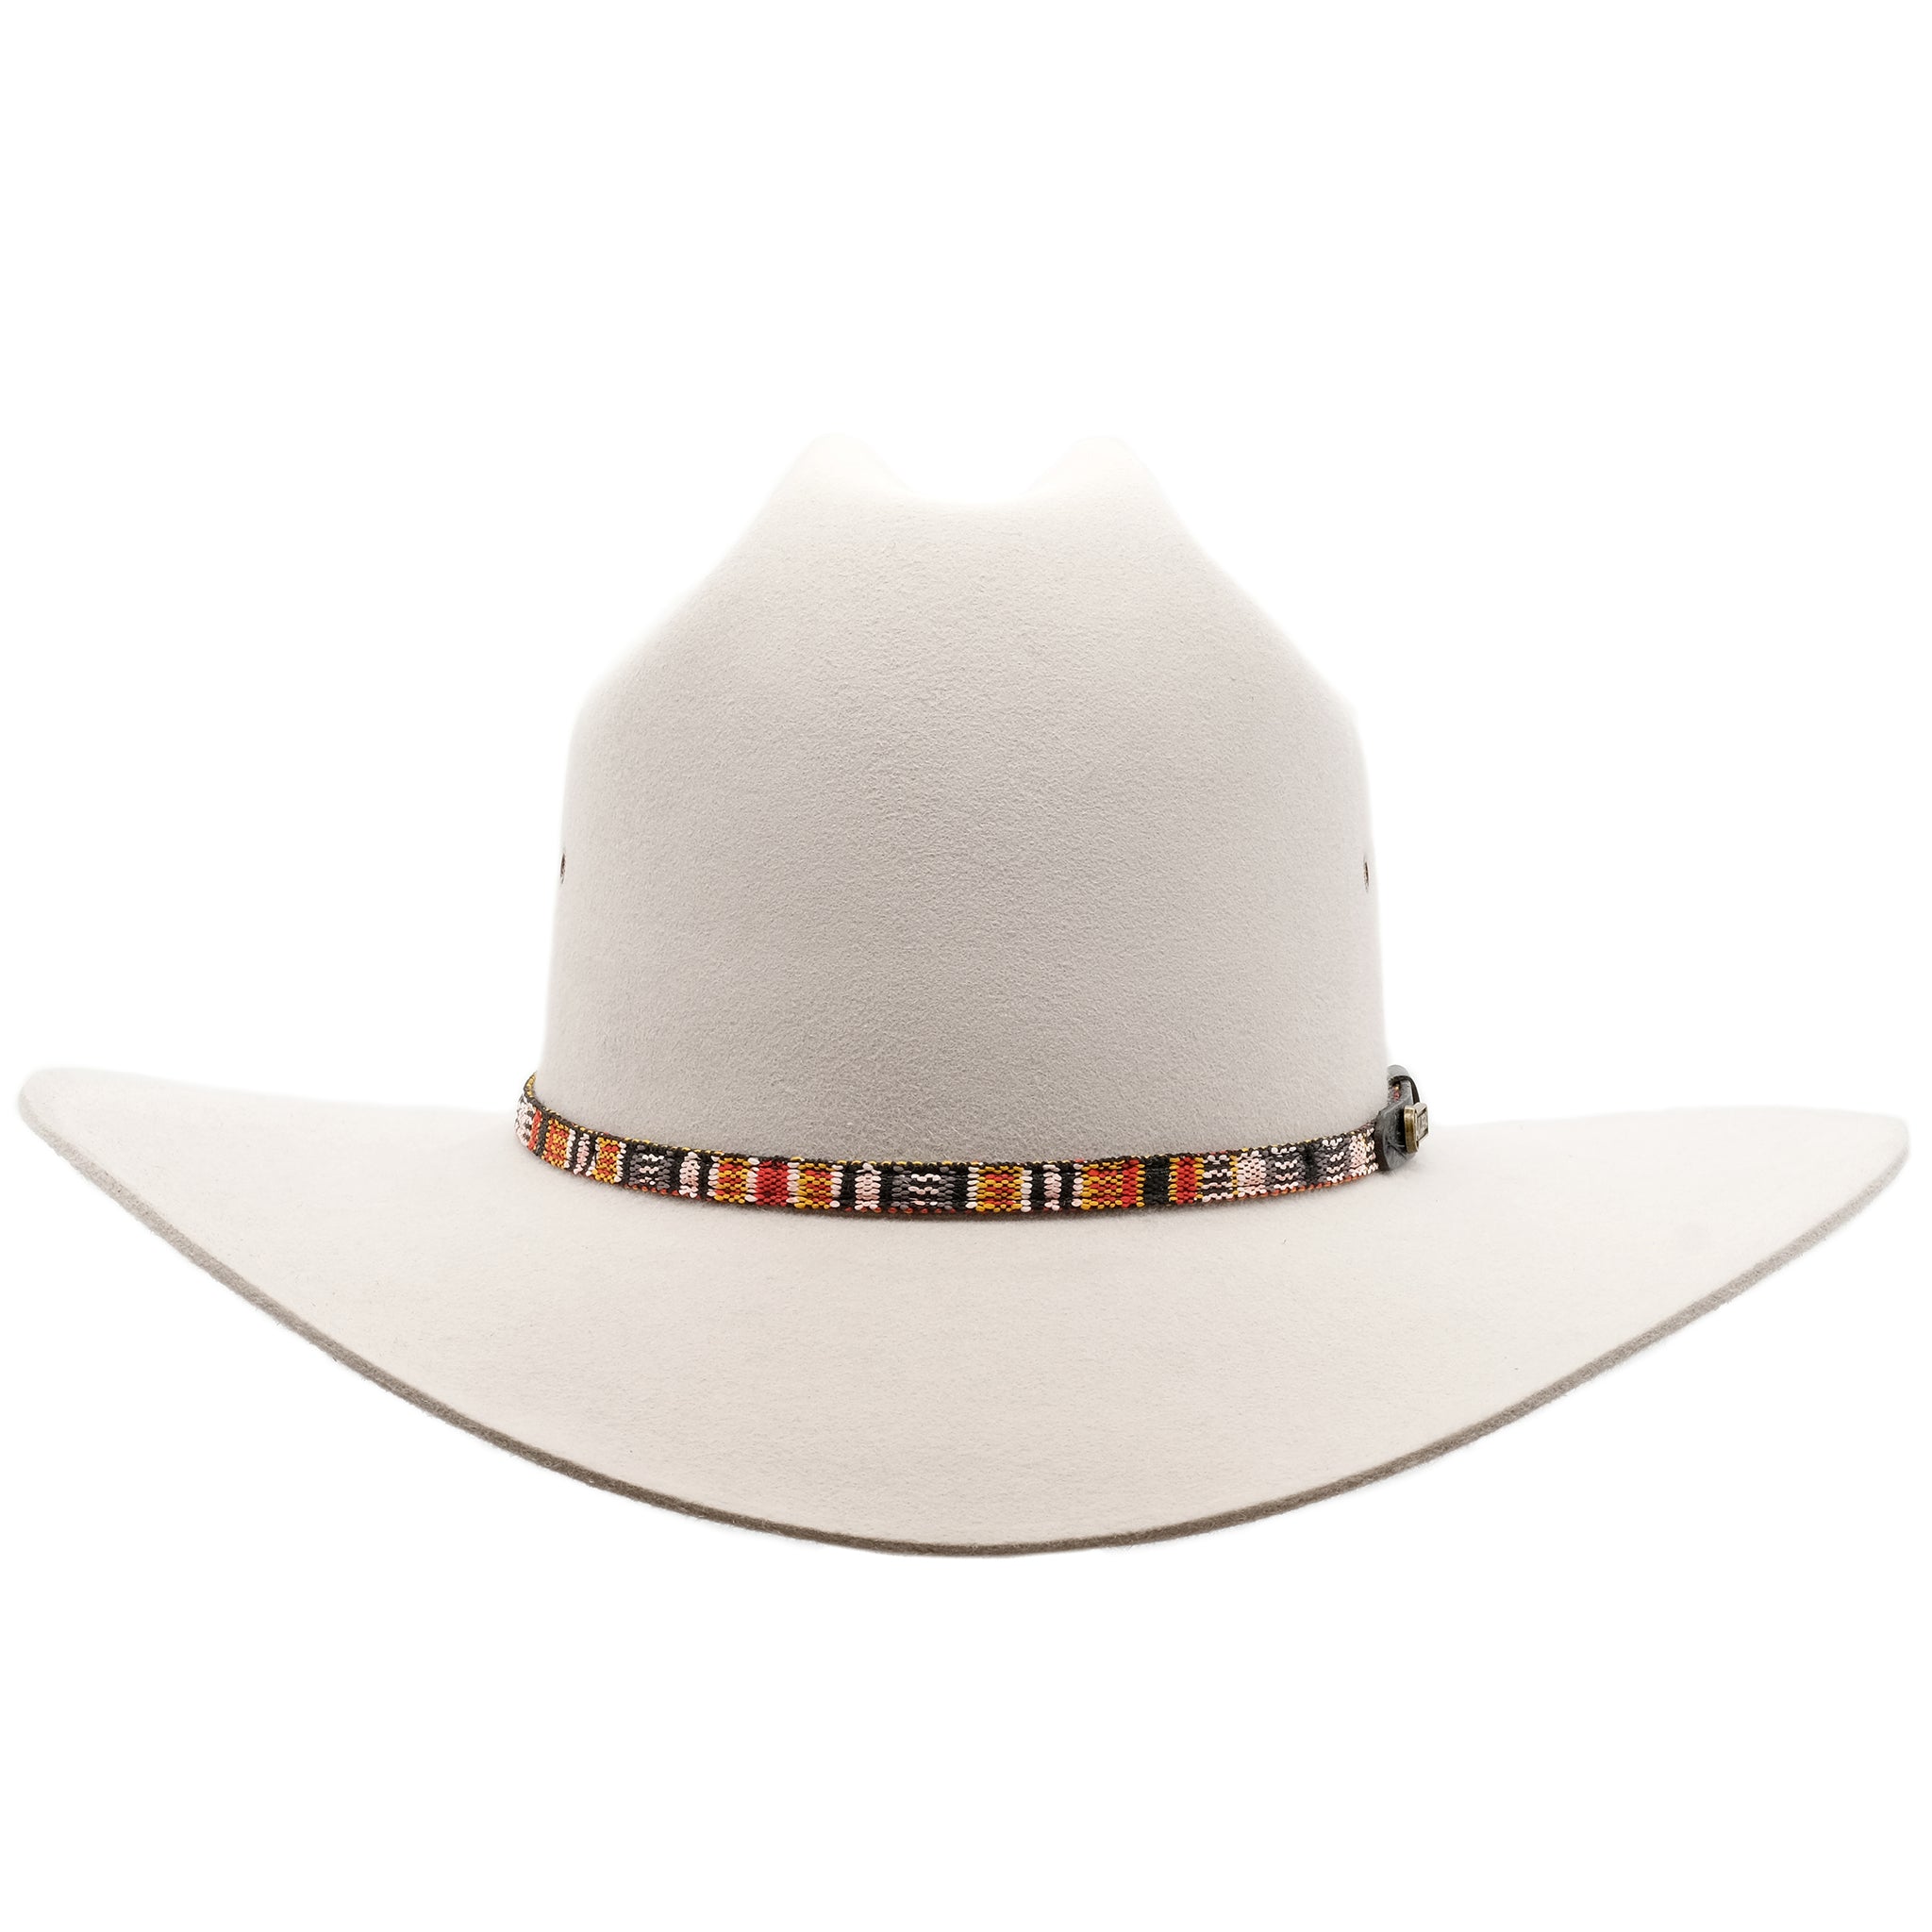 Front view of the Akubra Bronco hat in Quartz colour